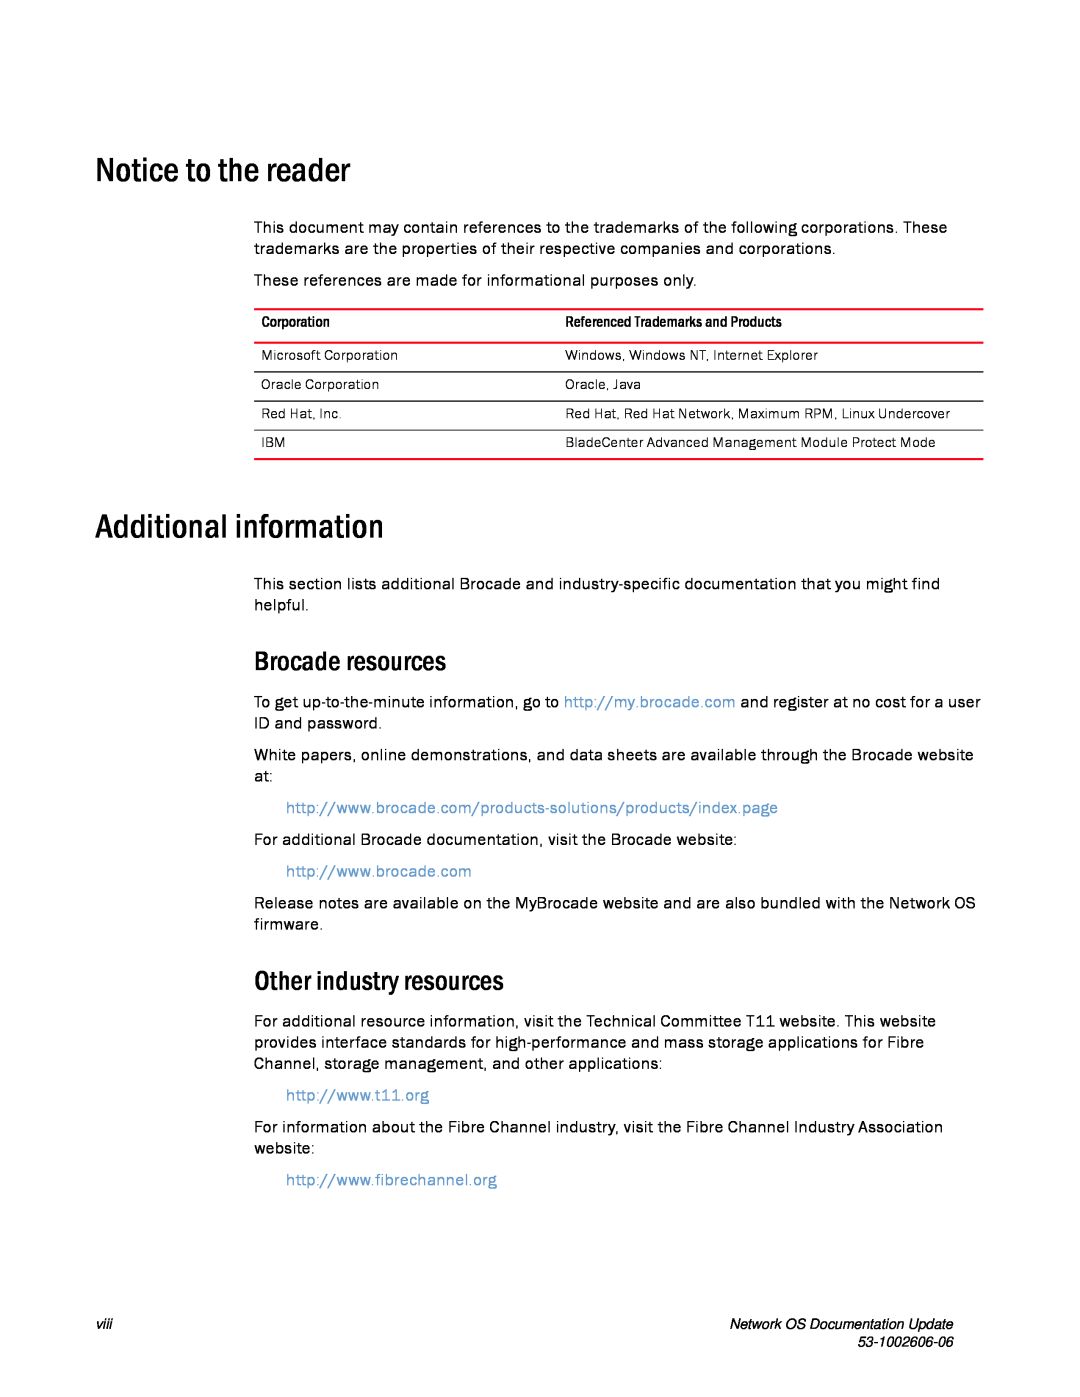 Brocade Communications Systems 2.1 manual Notice to the reader, Additional information, Brocade resources 